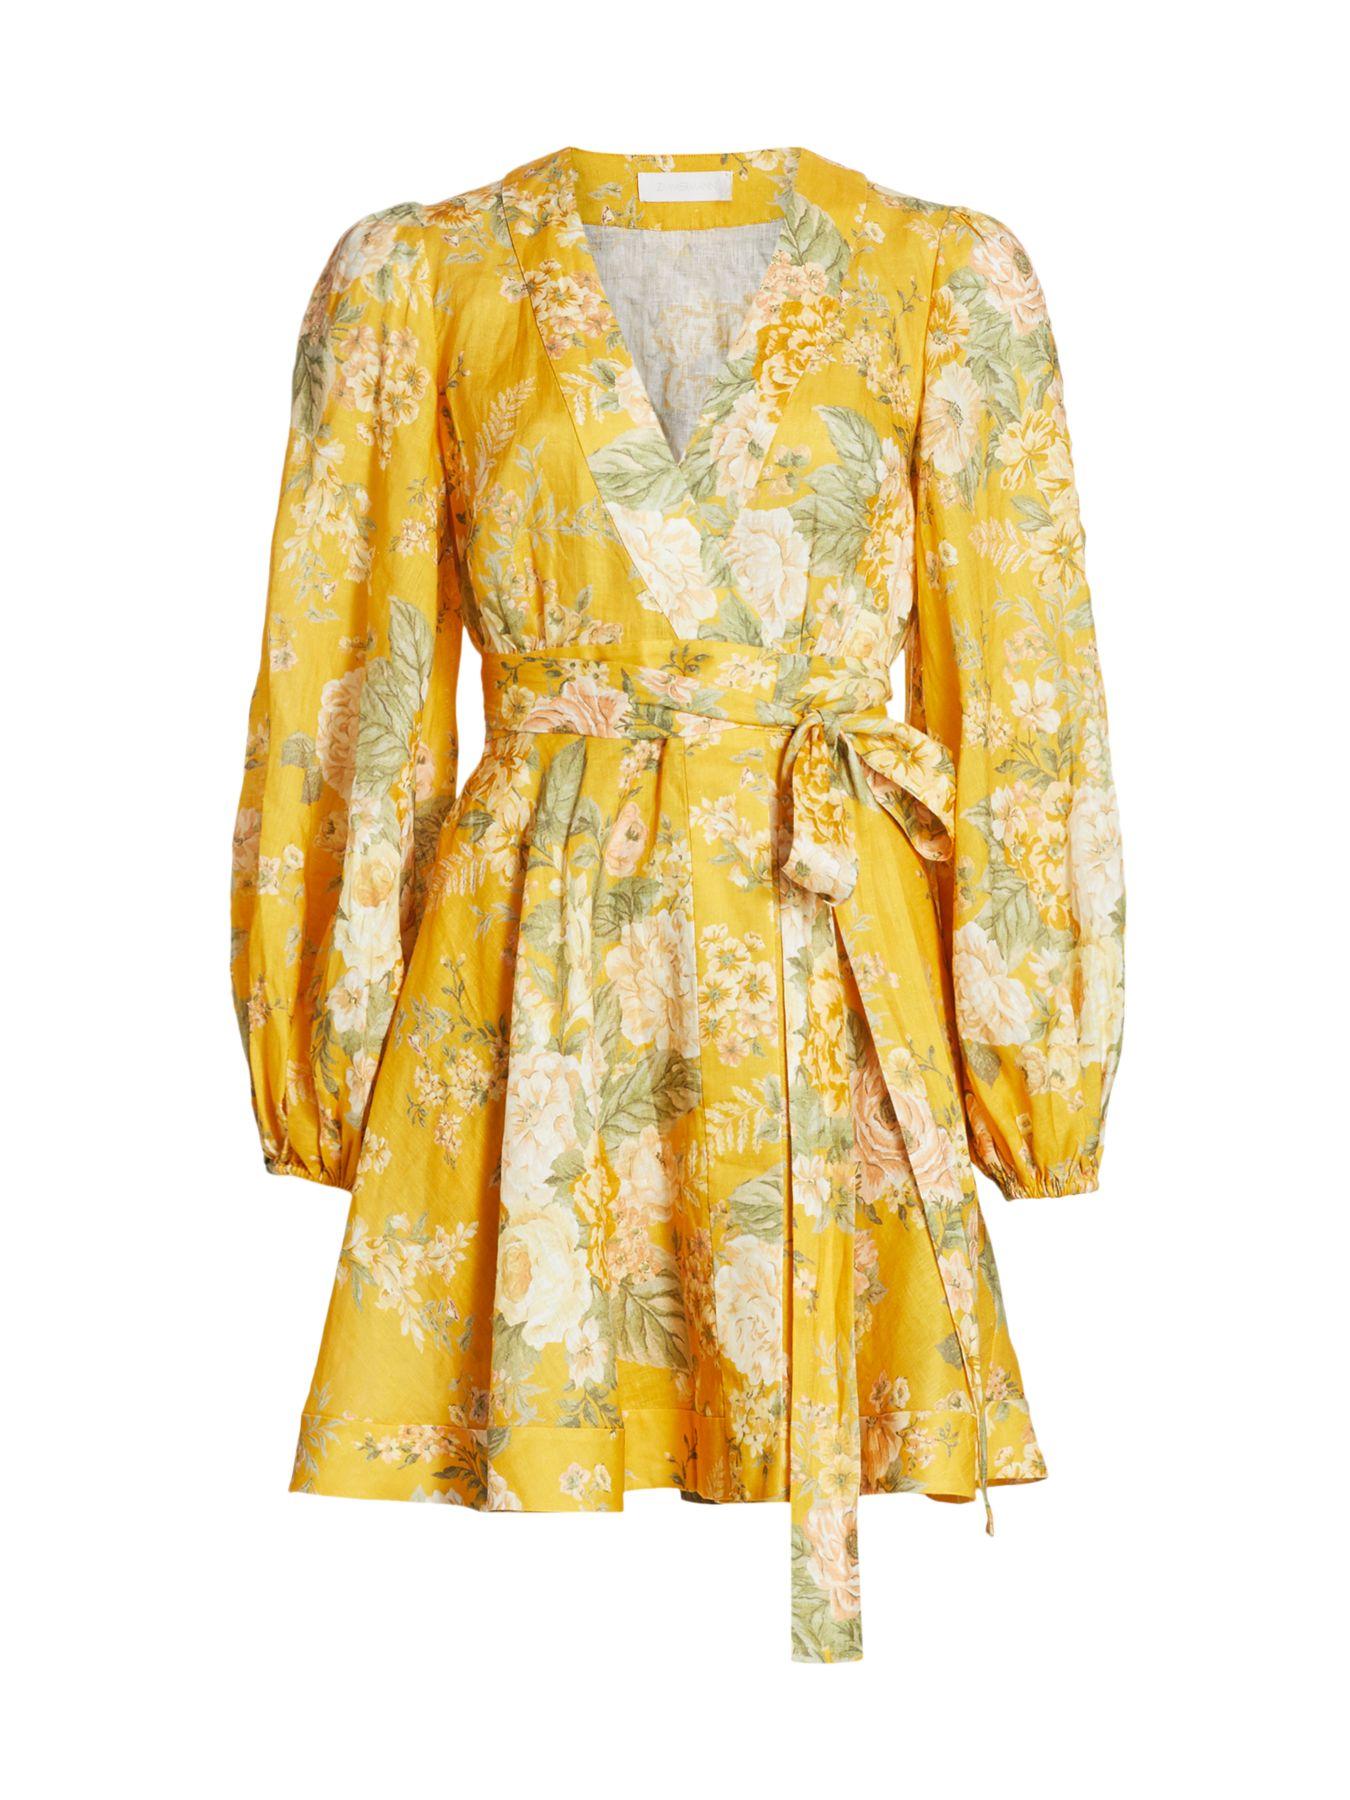 Zimmermann Linen Amelie Floral Wrap Dress in Amber Floral (Yellow) - Lyst